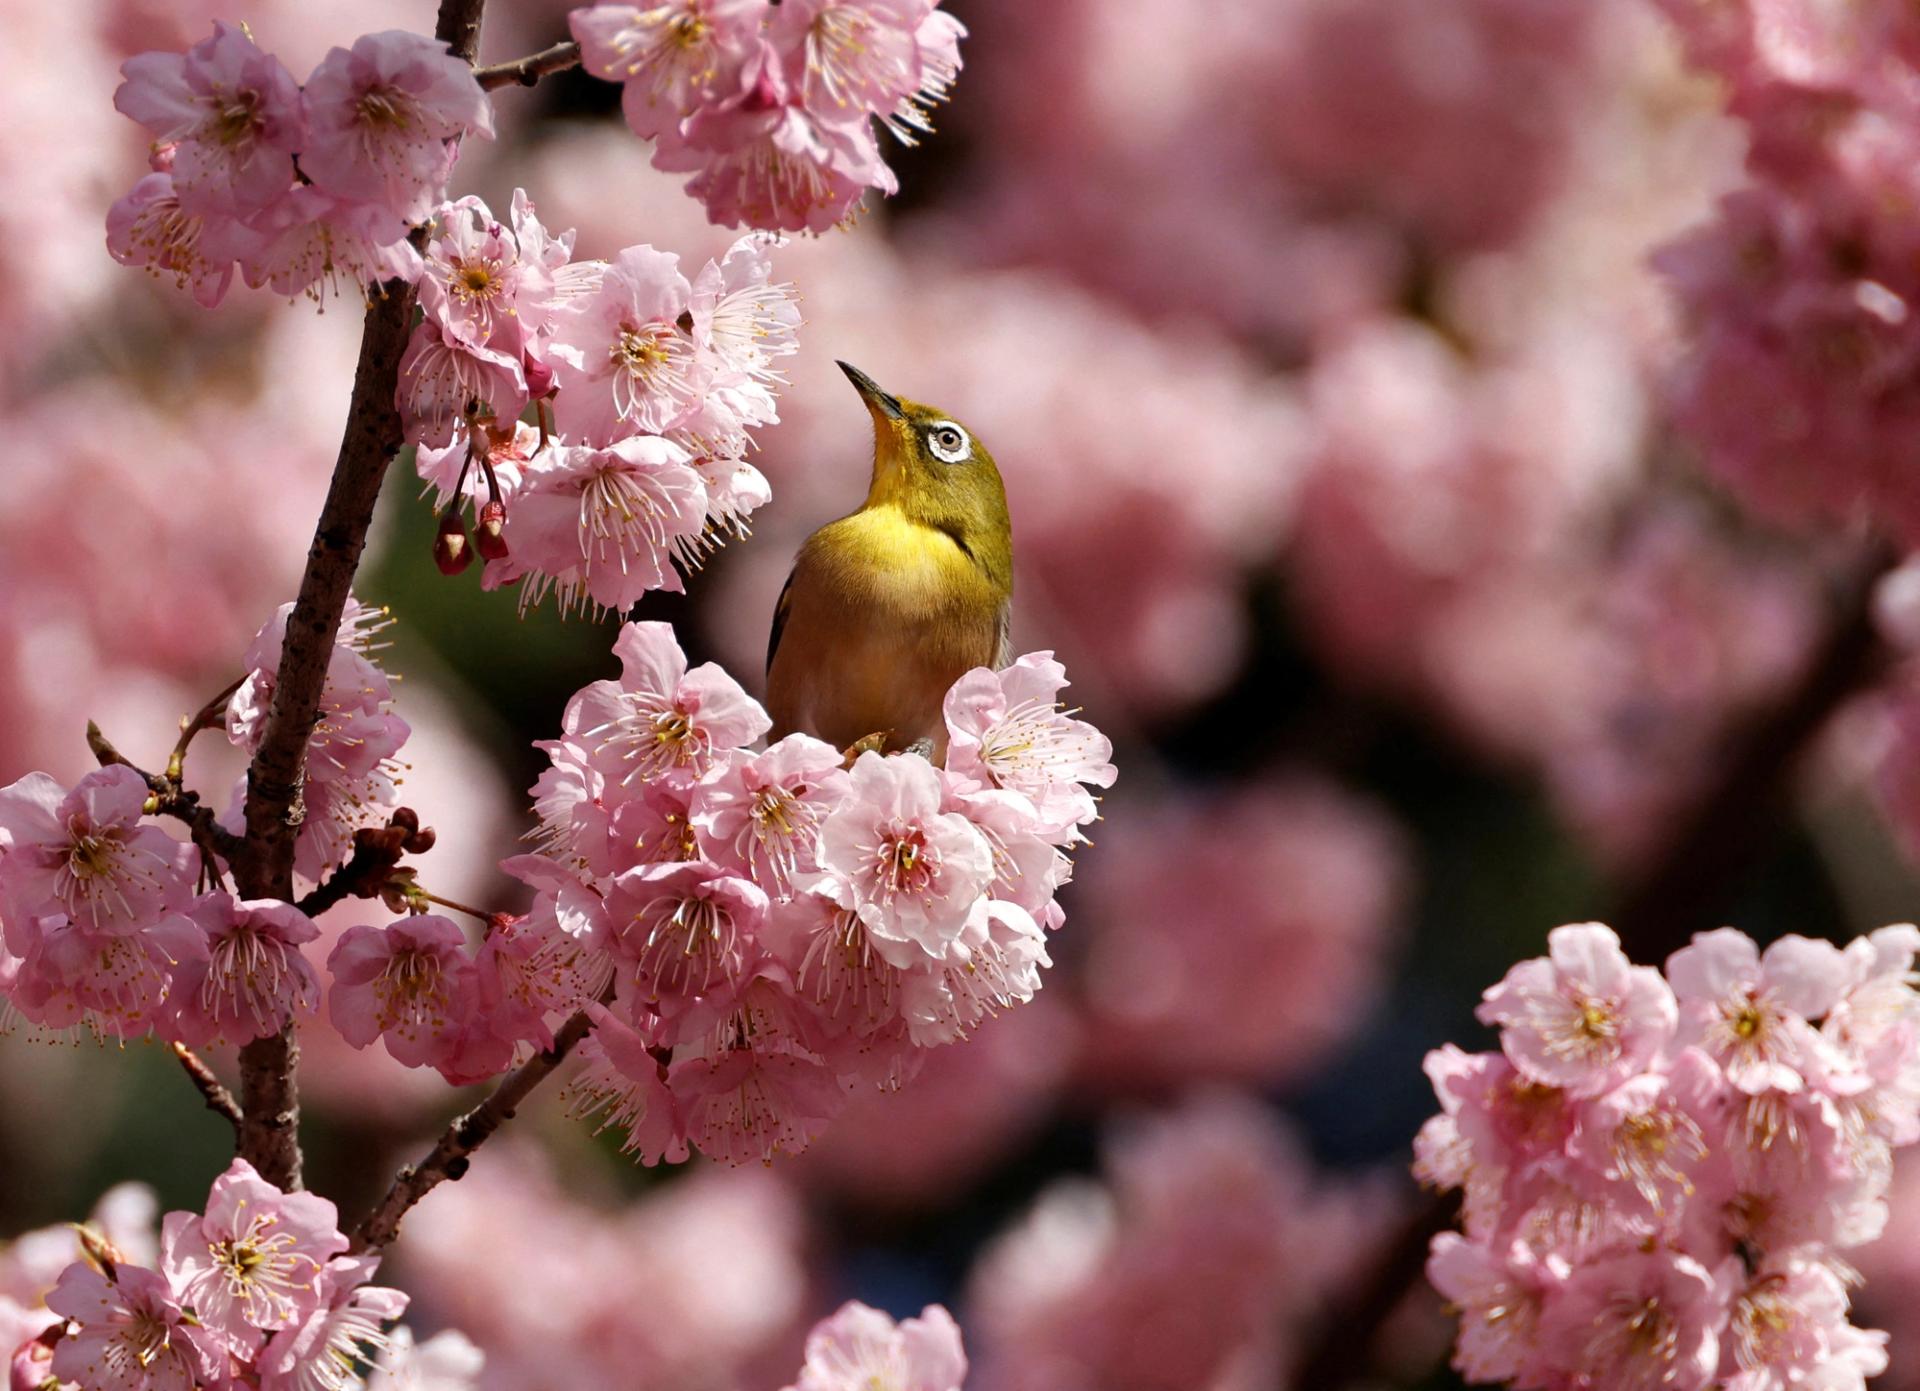 A white-eye bird is seen on an early-flowering cherry blossoms in full bloom at a park in Tokyo, Japan March 1, 2023. REUTERS/Issei Kato